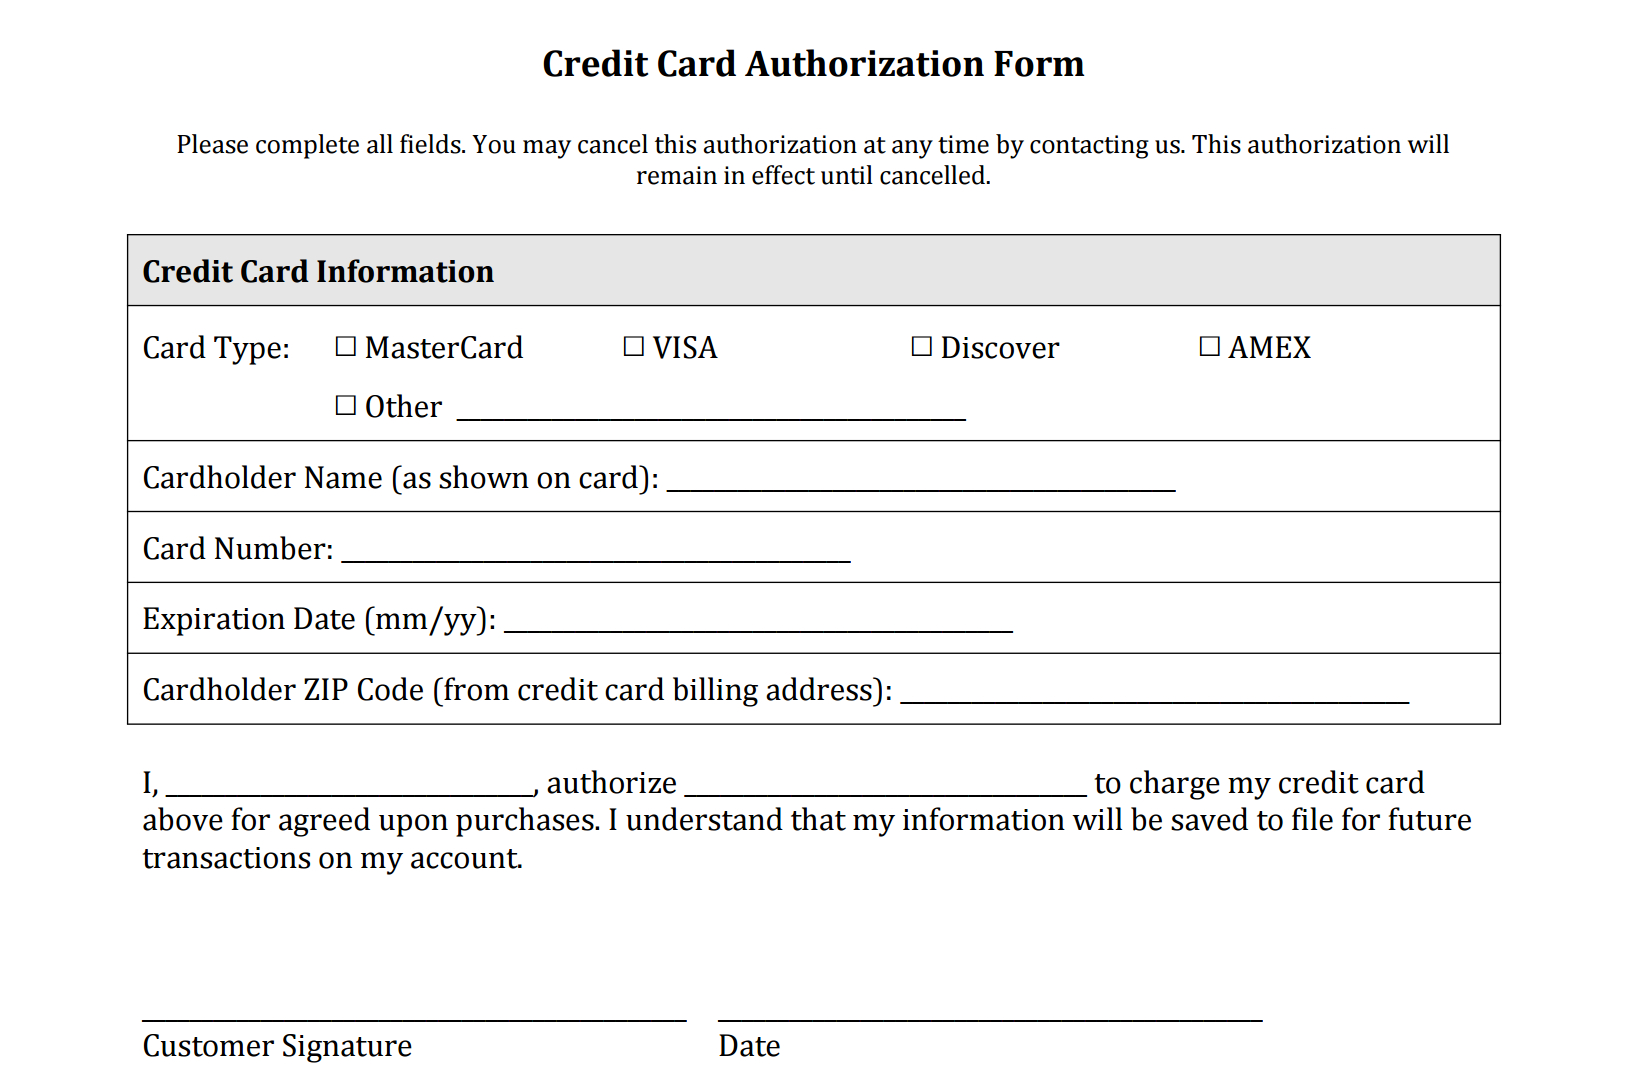 Credit Authorization Form | Types Of Credit Cards, Credit Intended For Credit Card Authorisation Form Template Australia